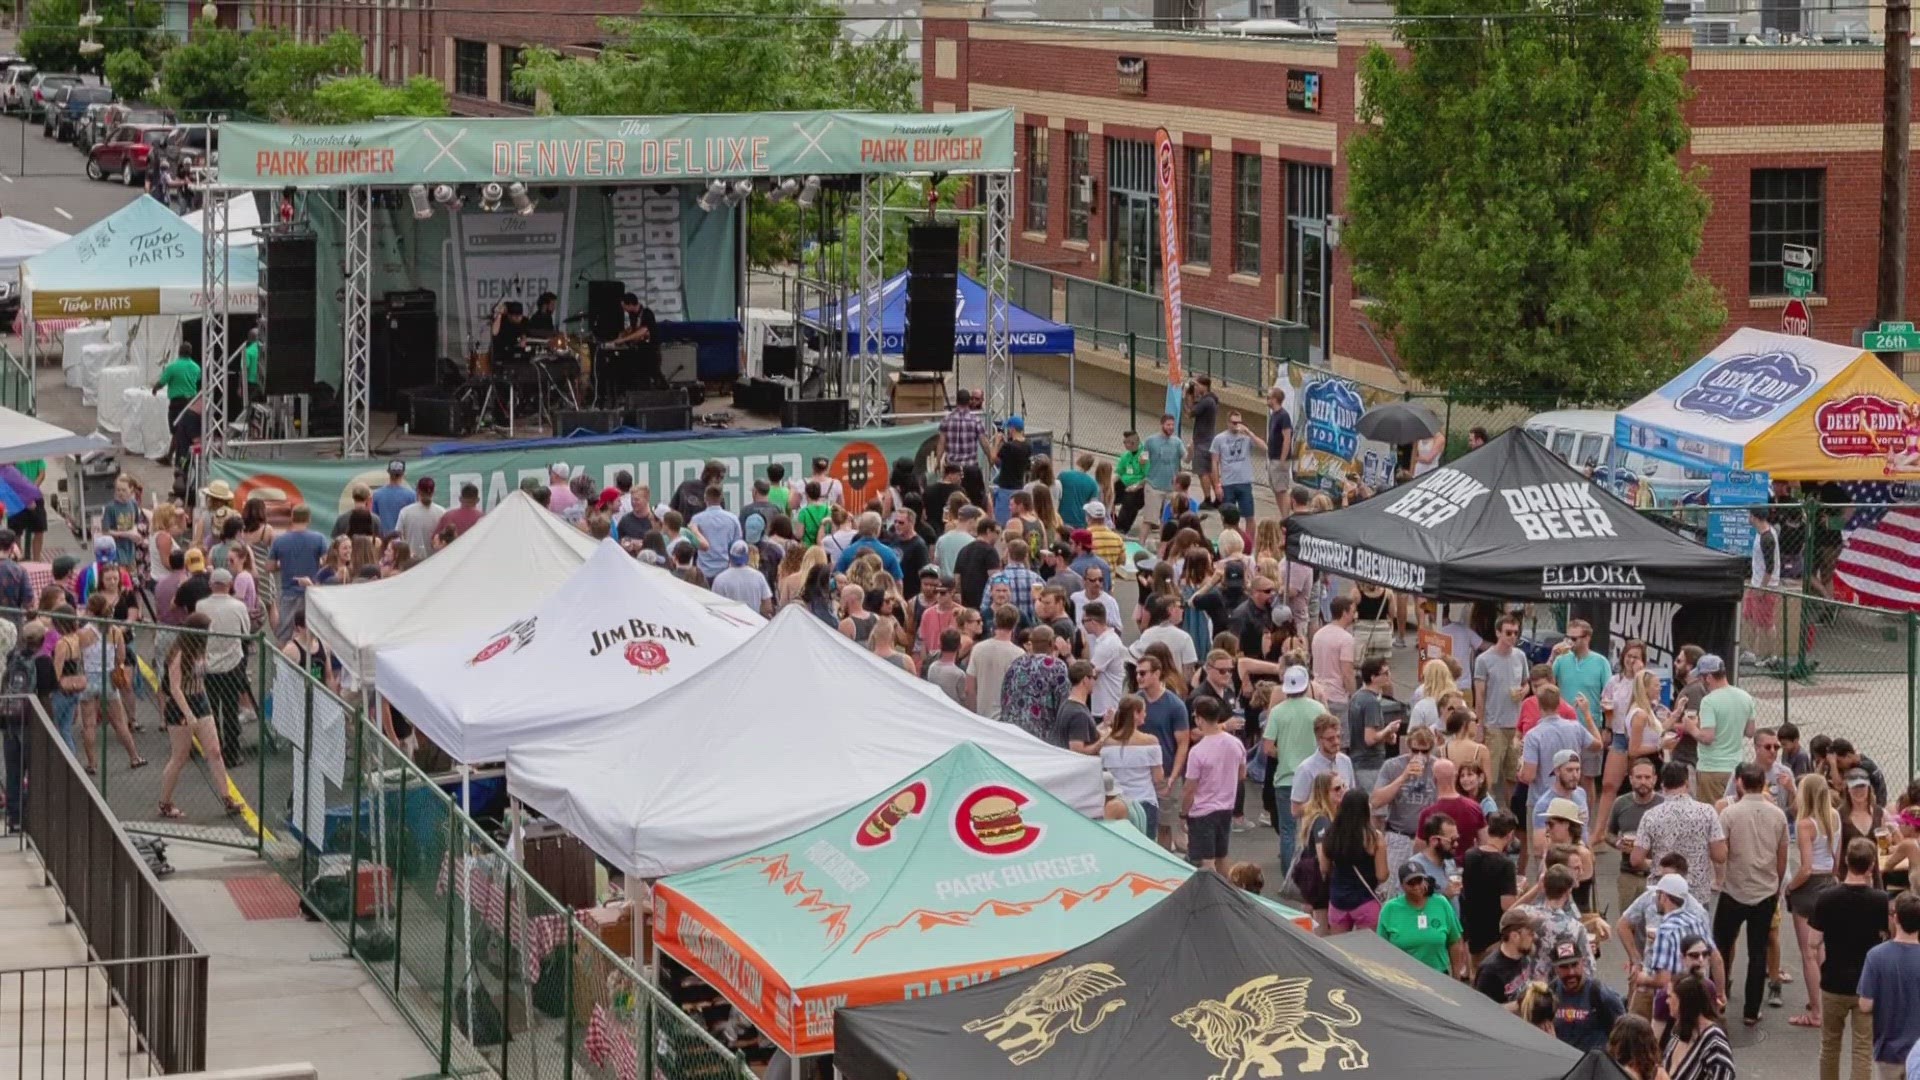 Denver Deluxe features live music, food, art and so much more. Proceeds from the event go to benefit the nonprofit Colorado Uplift.